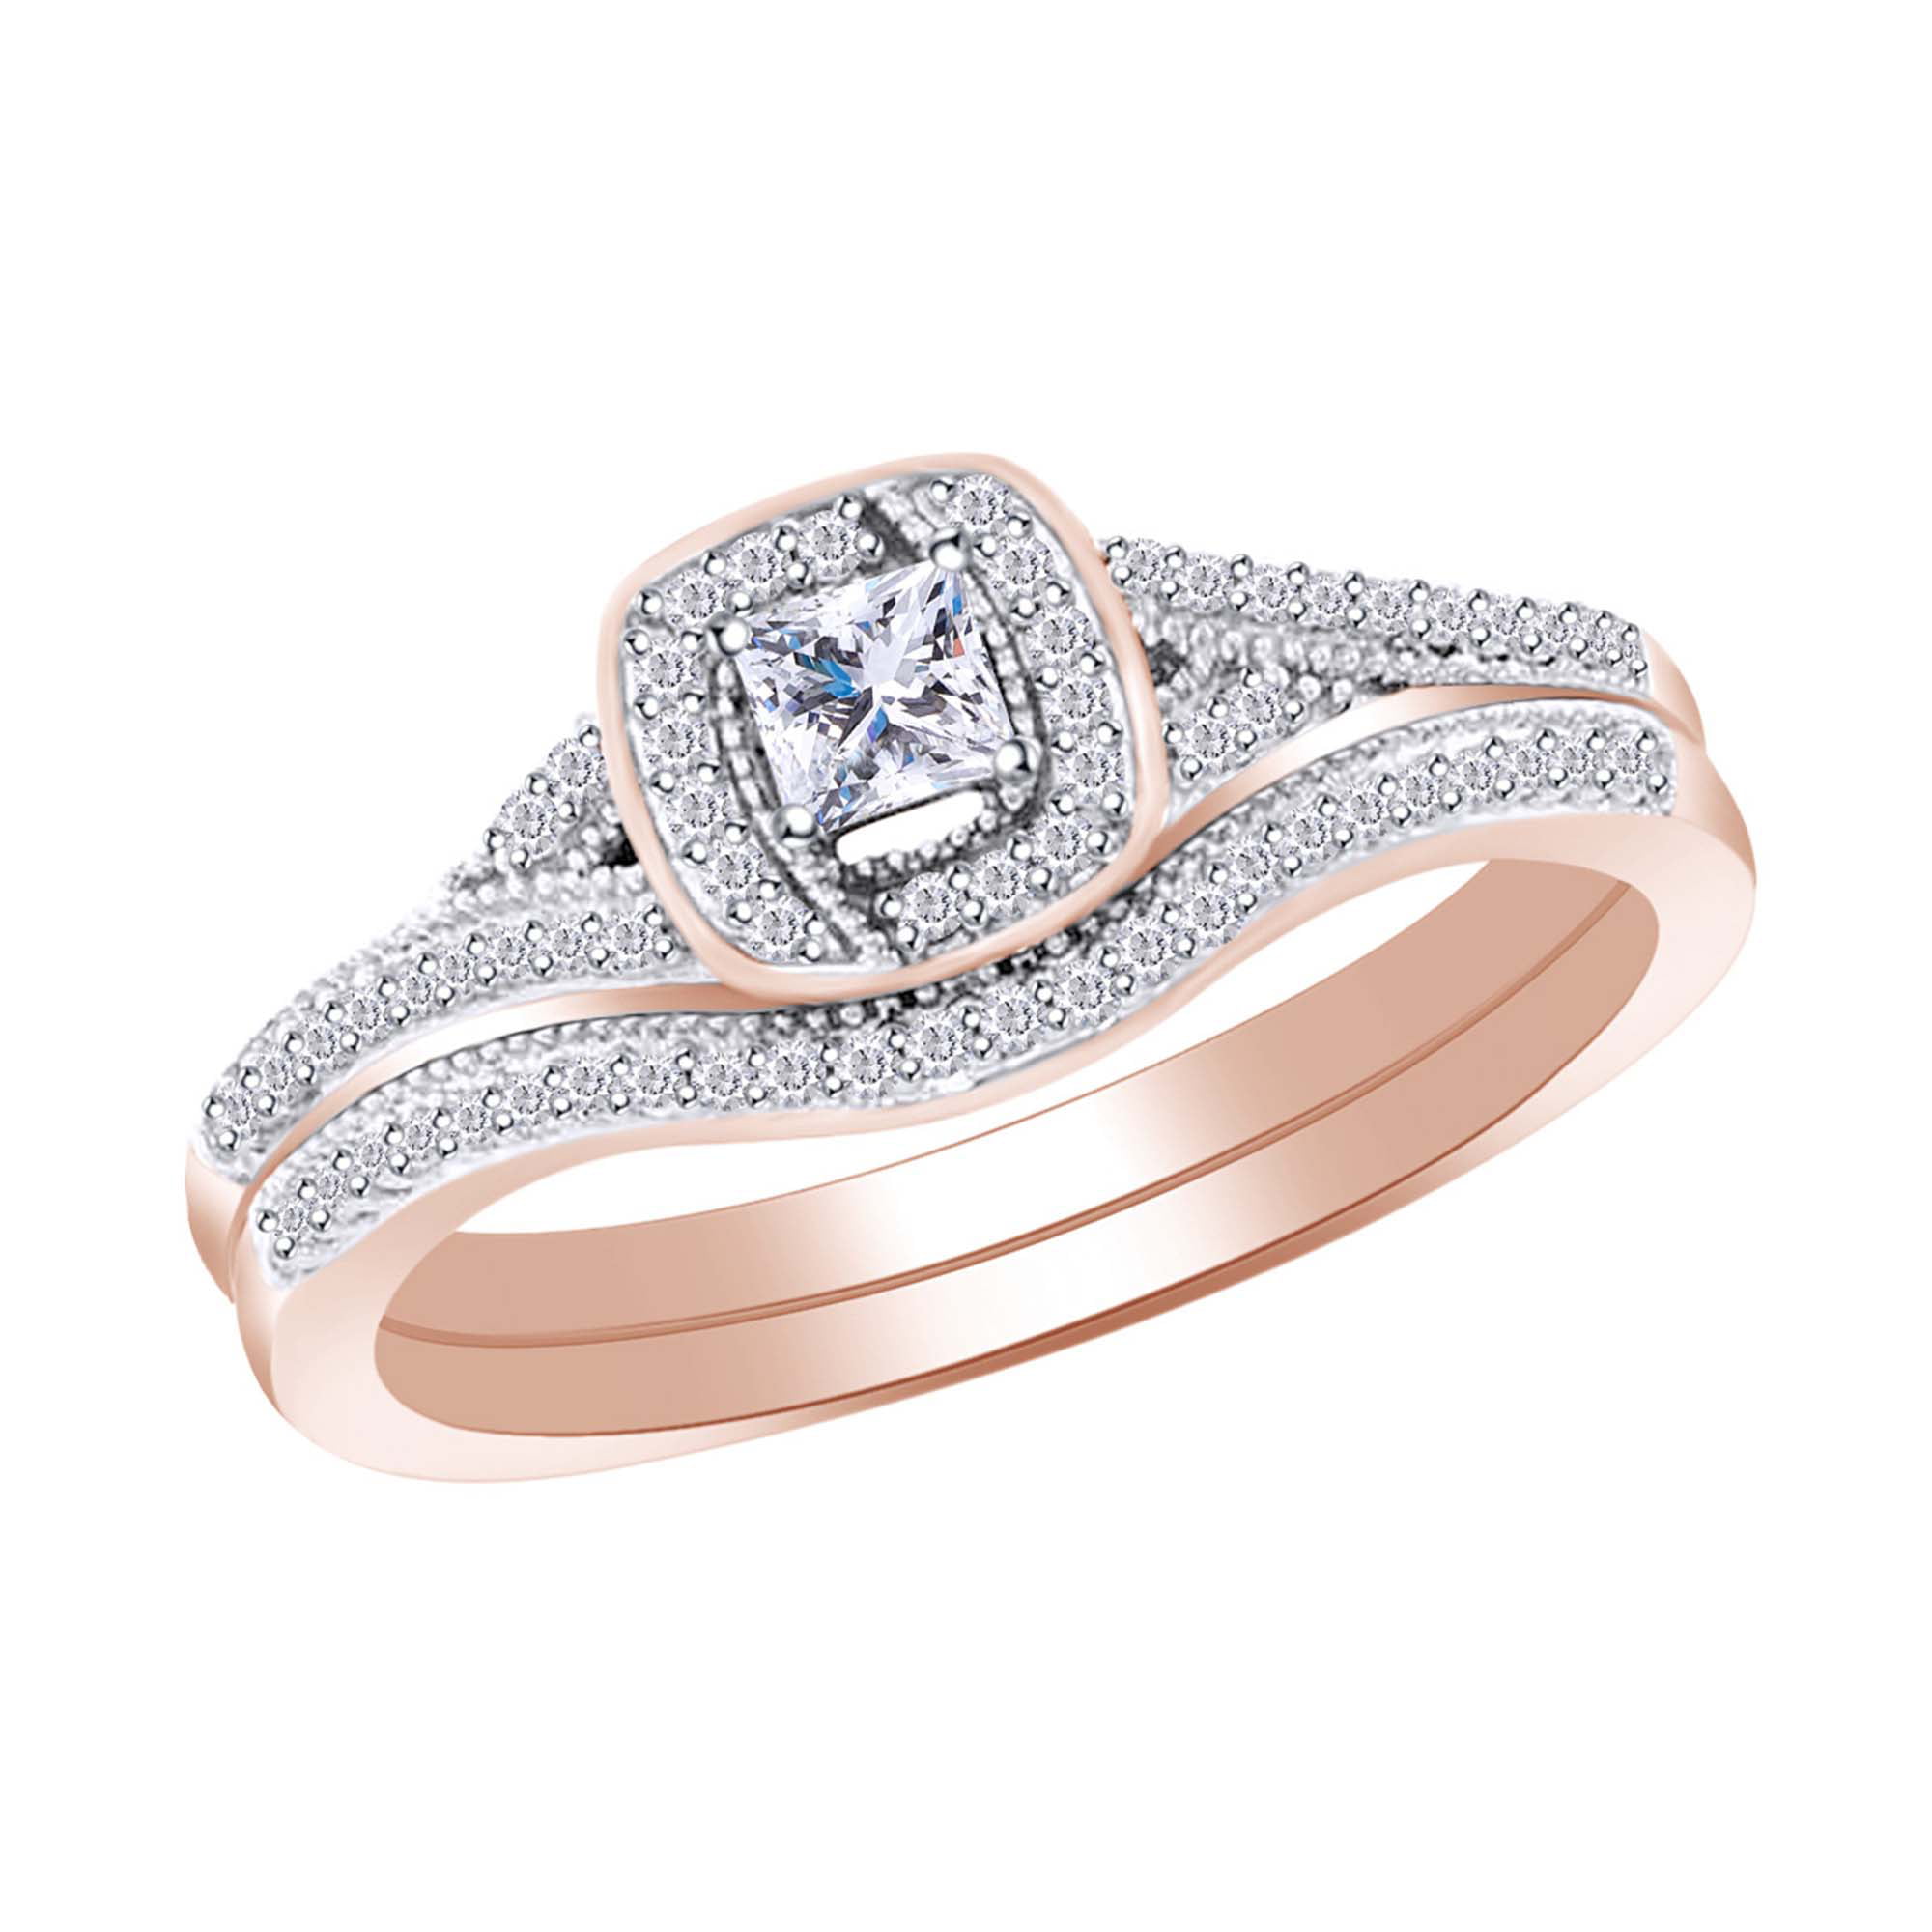 G-H,I2-I3 Size-9.5 1/20 cttw, Diamond Wedding Band in 10K Pink Gold